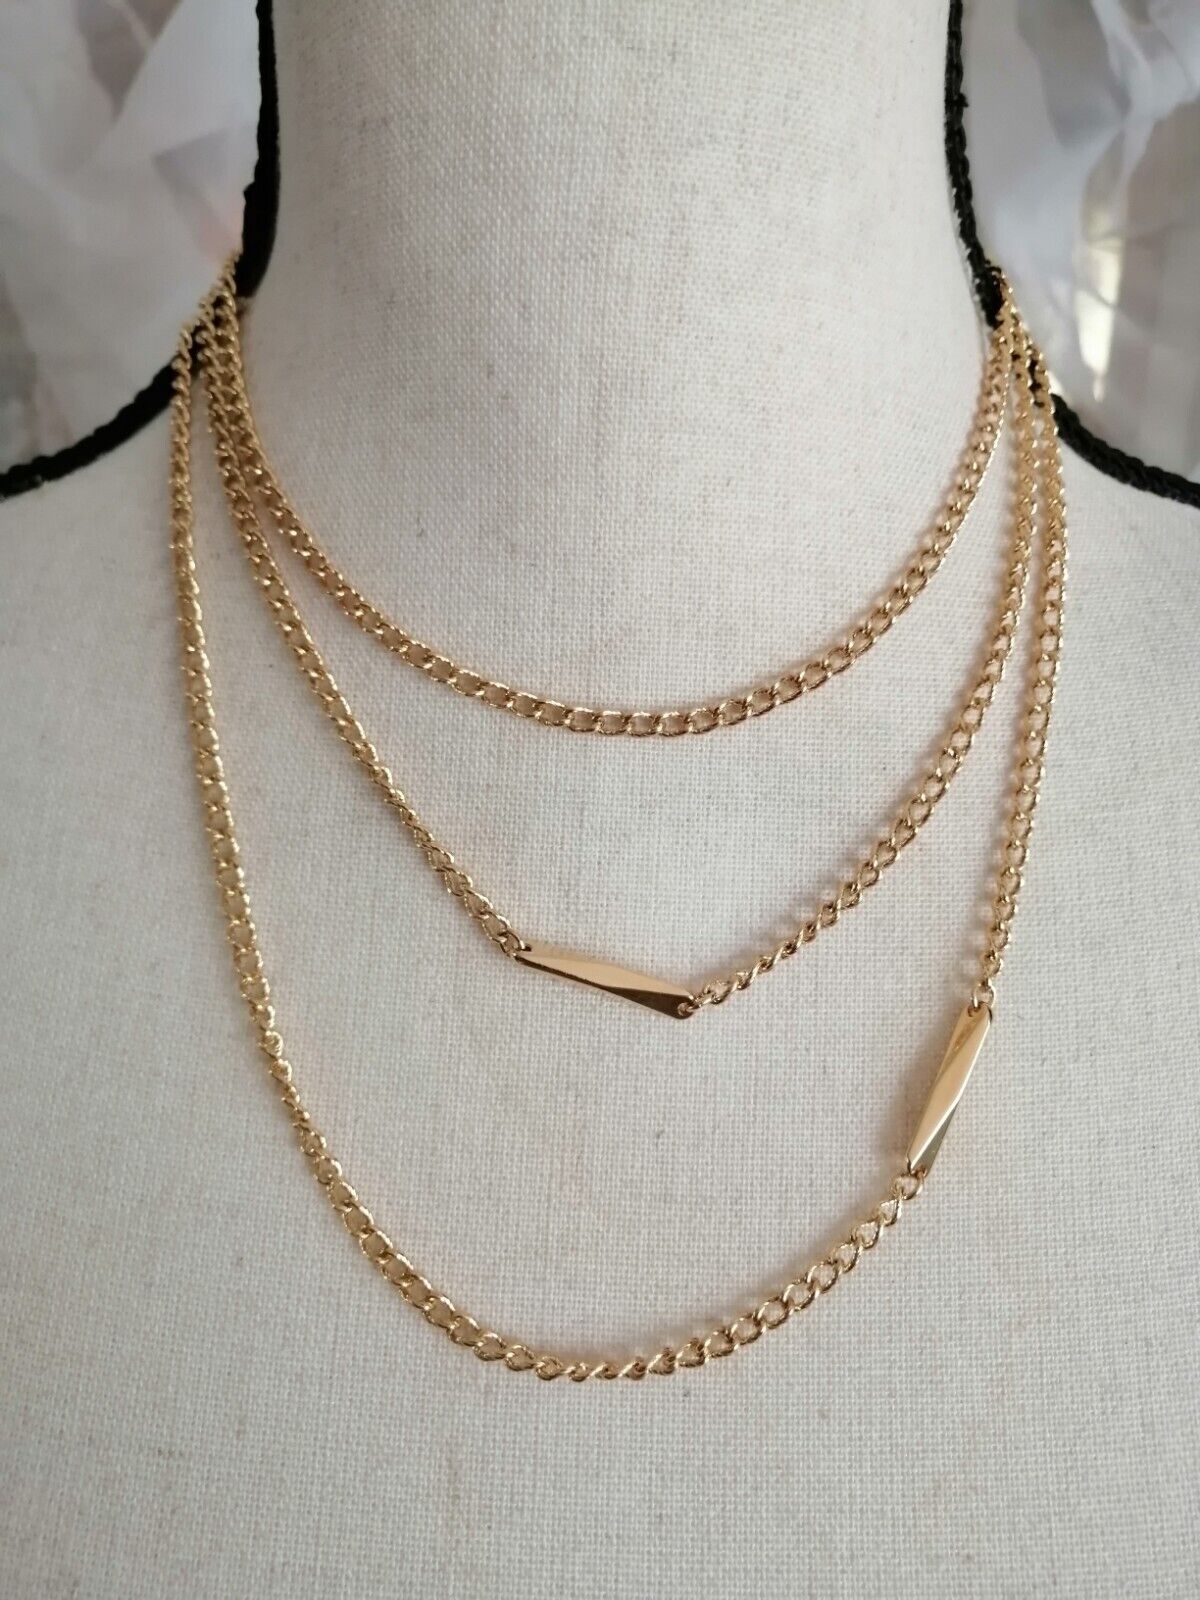 VTG Monet Gold Tone Chain Necklace Bar Stattion Extra Long Signed 90s  NWT